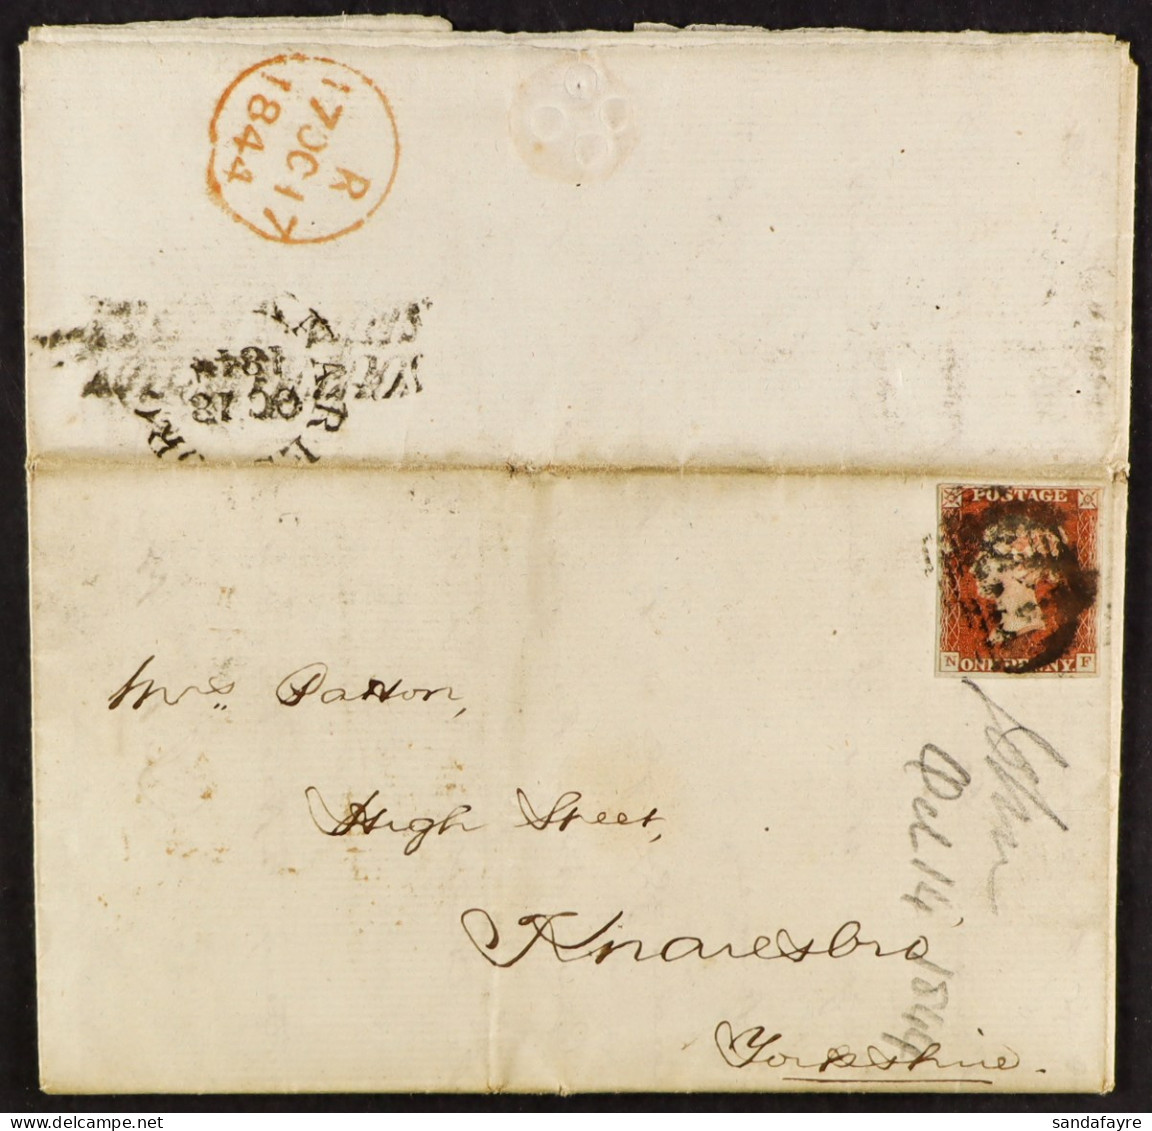 STAMP - SOUTHAMPTON SHIP LETTER 1844 (14th October) A Letter From Jersey To Knaresborough, Via Southampton, Prepaid With - ...-1840 Vorläufer